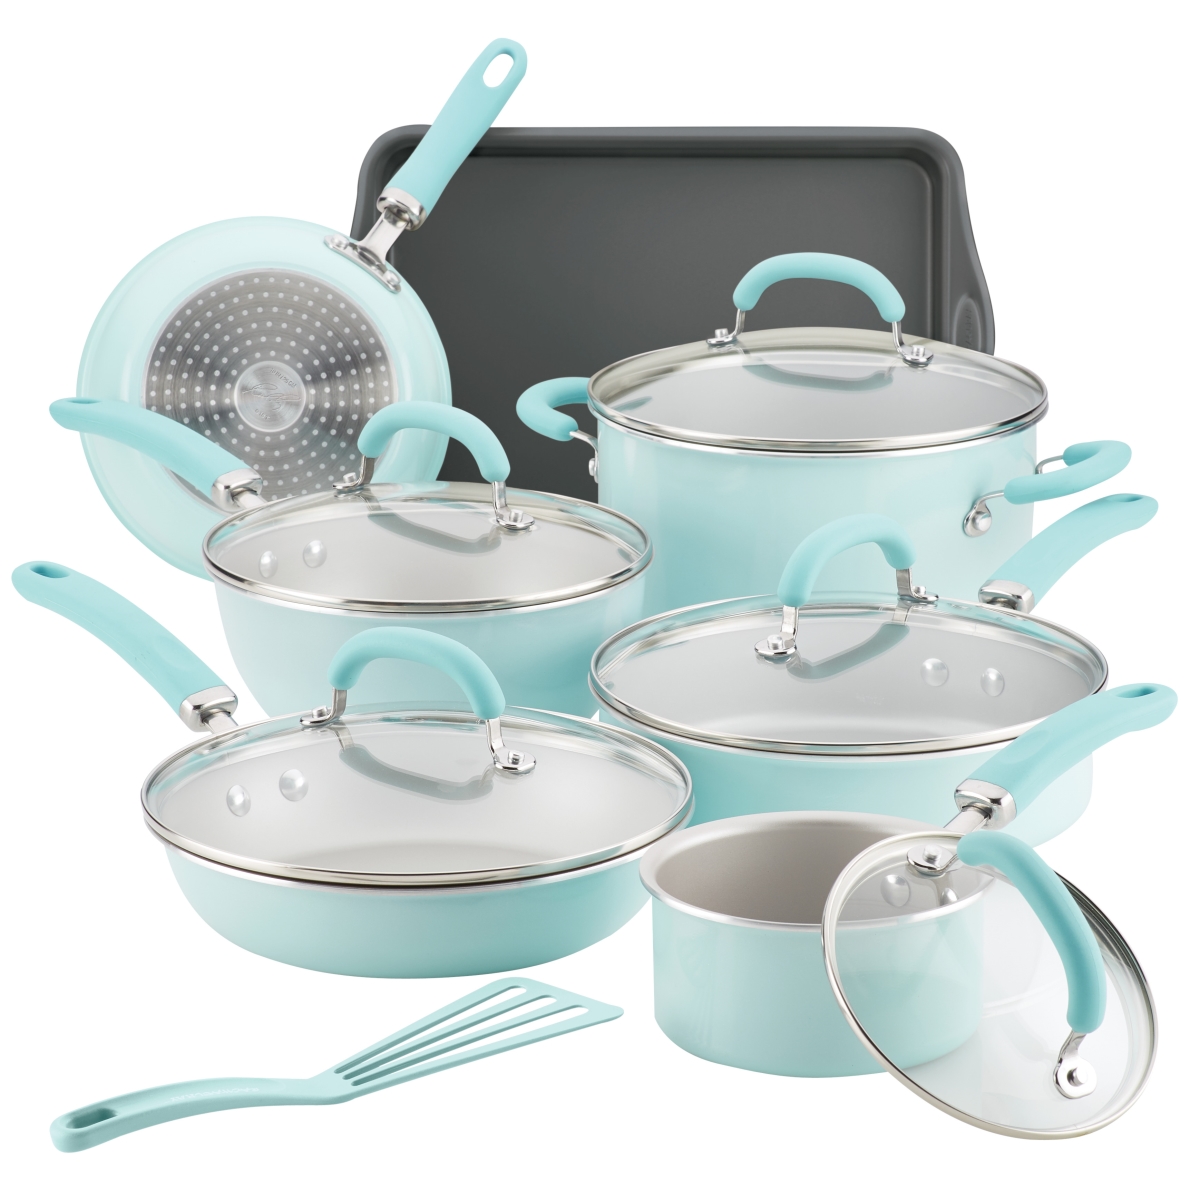 Picture of Rachael Ray 12146 Create Delicious Aluminum Nonstick Cookware Set, 13 Piece - Light Blue Shimmer